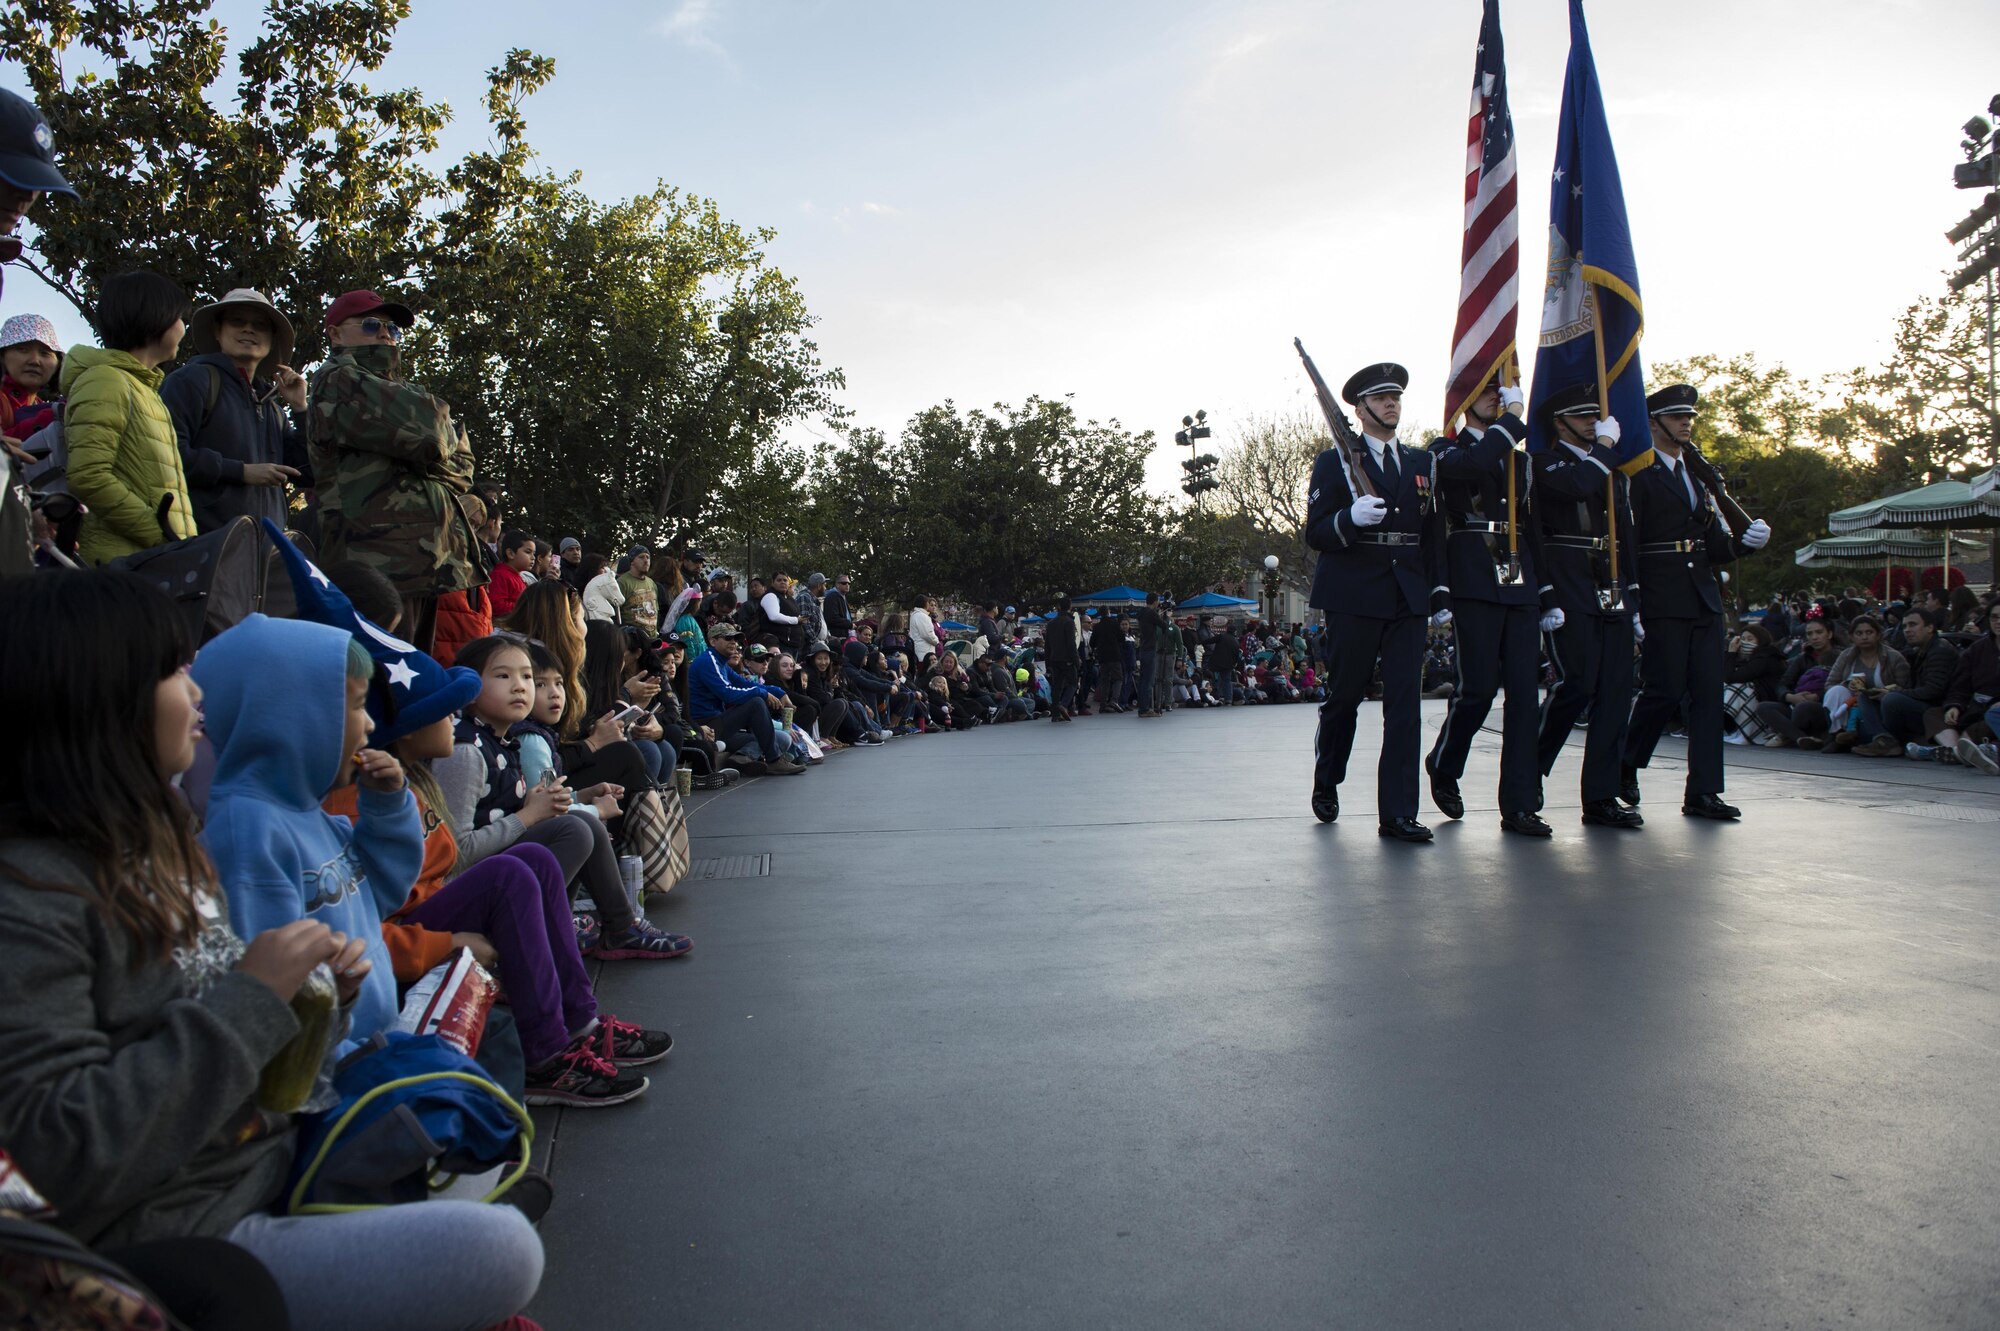 U.S. Air Force Honor Guard Drill Team members march past Disneyland guests in Anaheim, Calif., Jan. 1, 2017. Disneyland had approximately 44,000 guests lining the park’s streets as they marched. (U.S. Air Force photo by Senior Airman Philip Bryant)